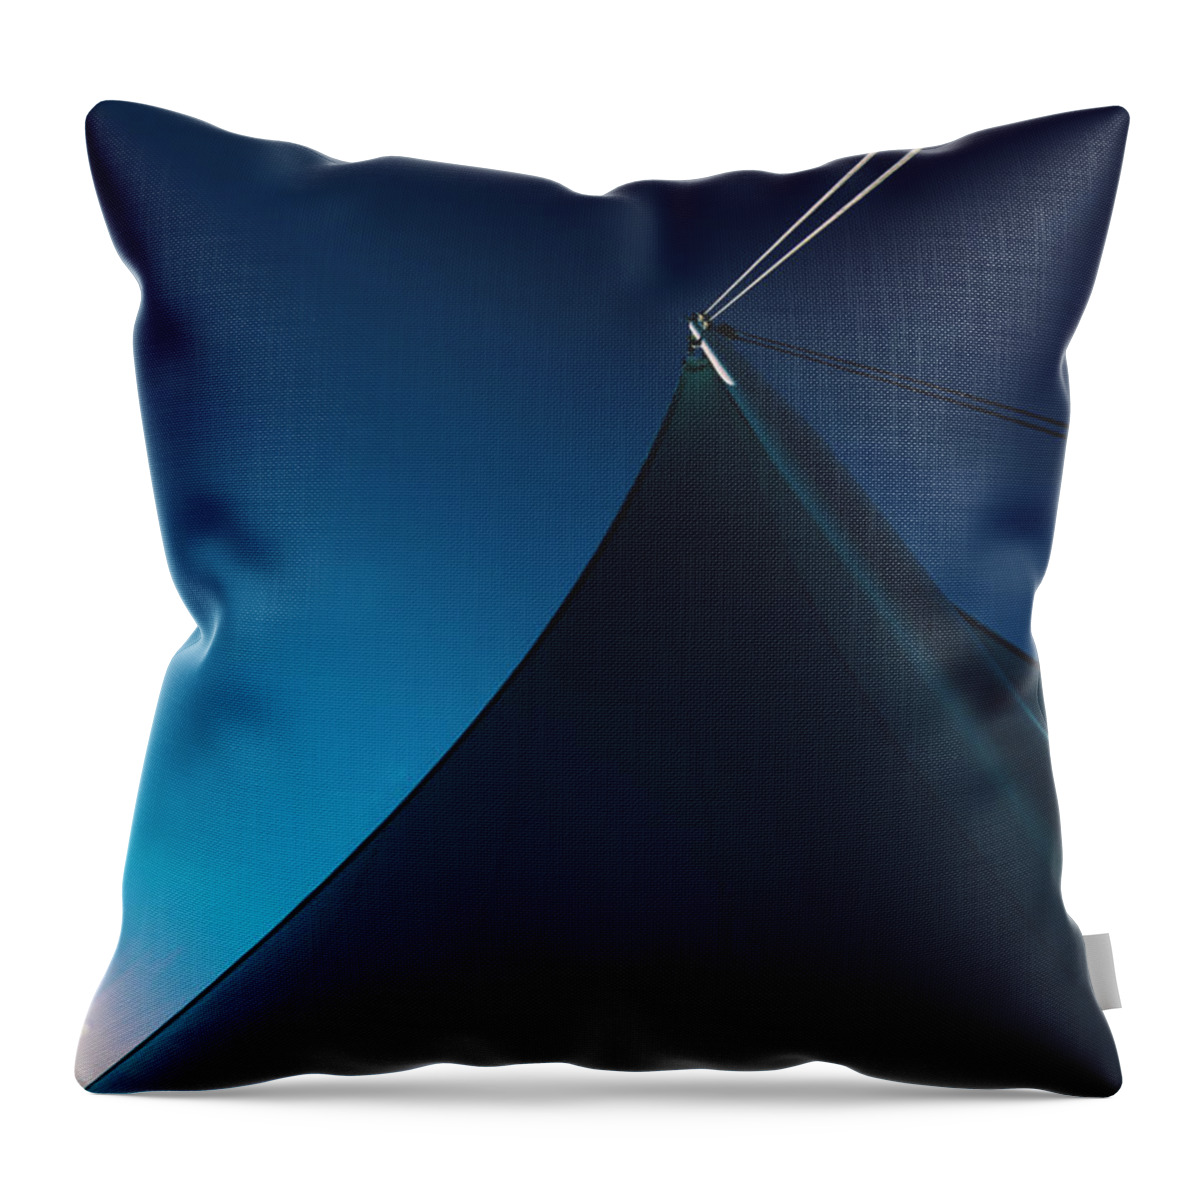 Port Of Vancouver Throw Pillow featuring the photograph 0174 Port of Vancouver Sails Canada Place by Amyn Nasser Neptune Gallery